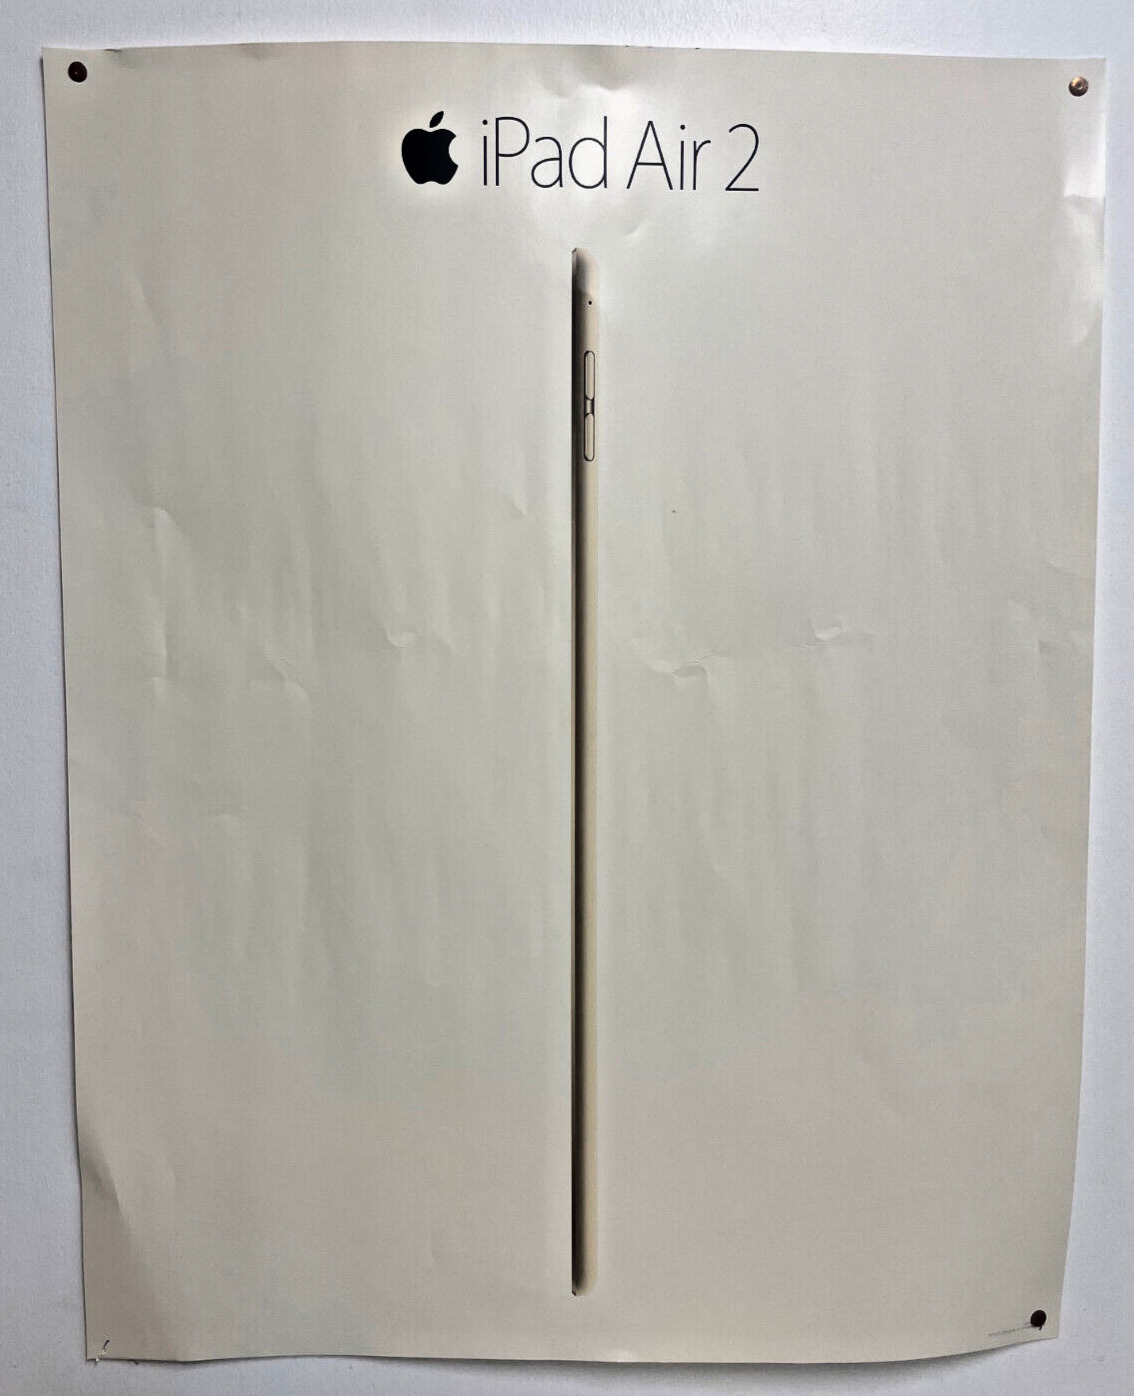 Vintage Apple Computer “iPad Air 2” Poster 22” x 28” with Apple Logo